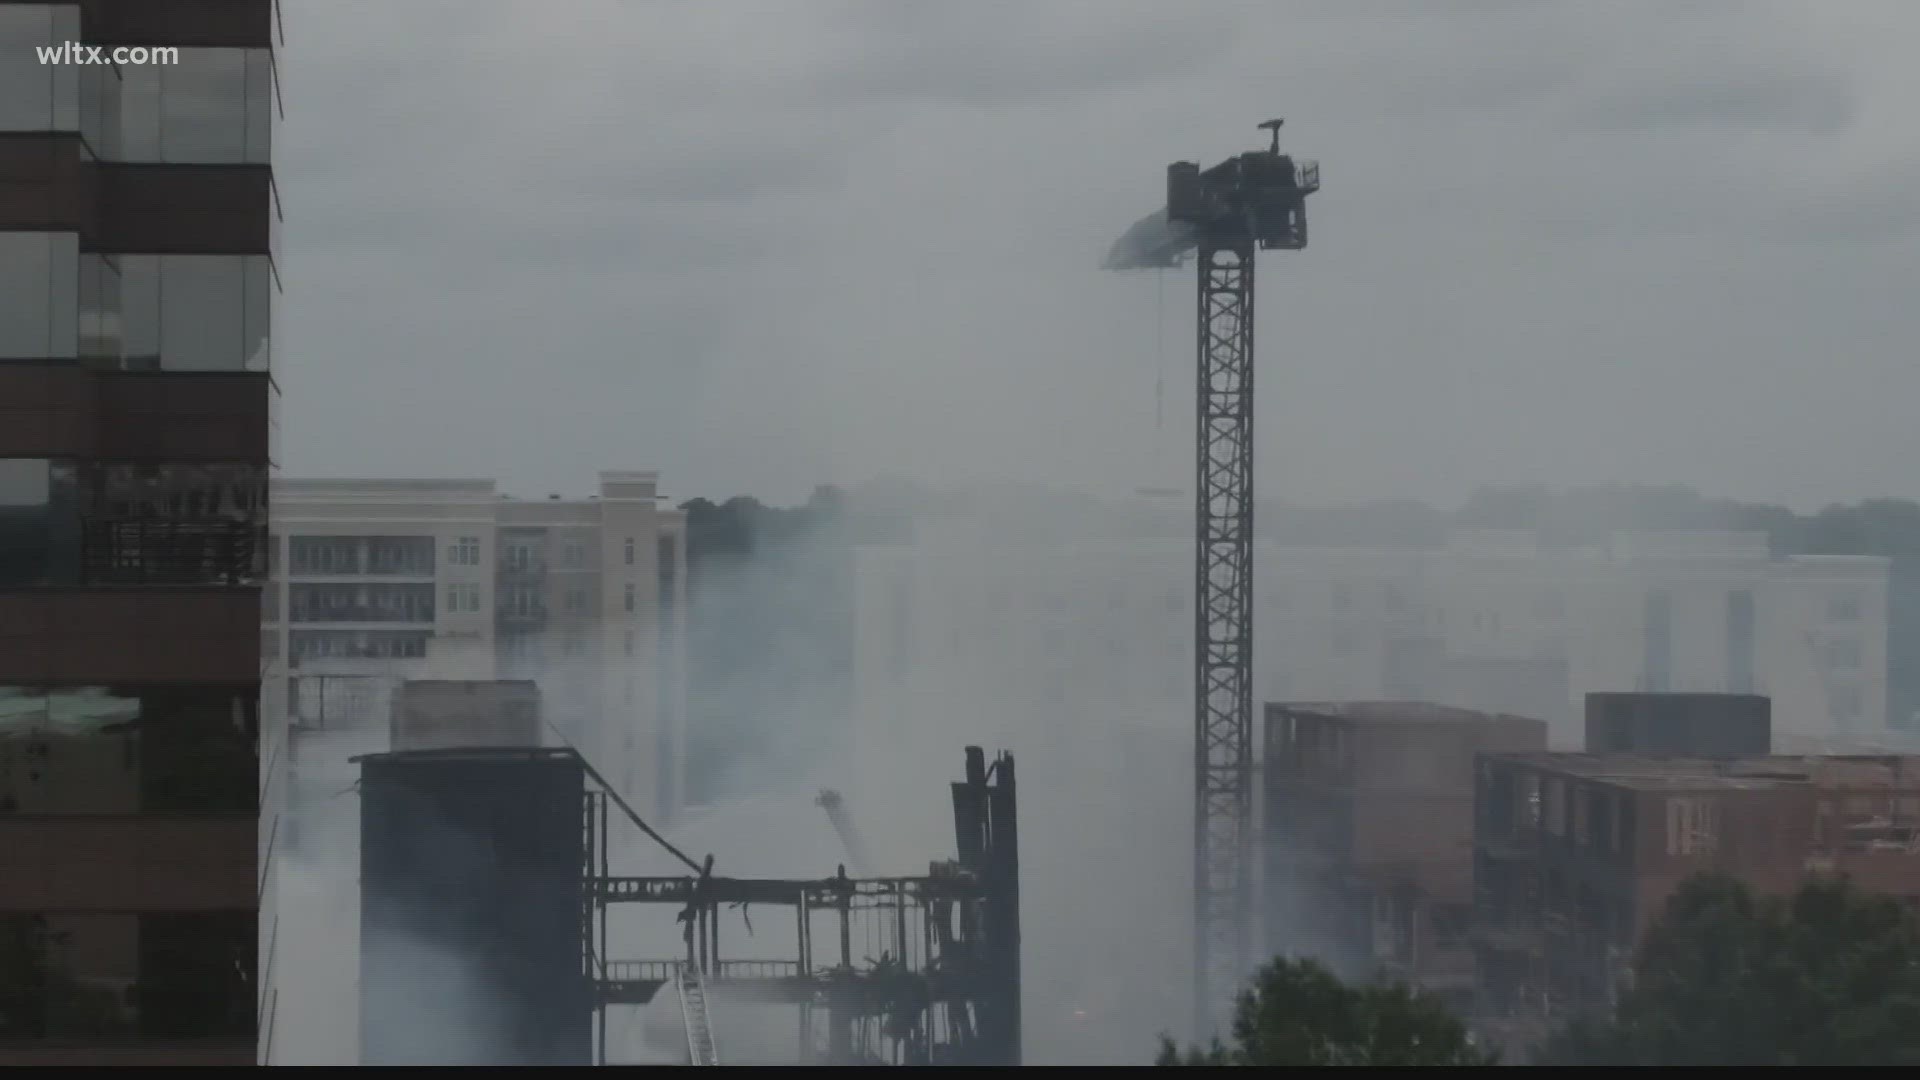 Over 90 firefighters worked together to rescue 15 construction workers and put out the fire.